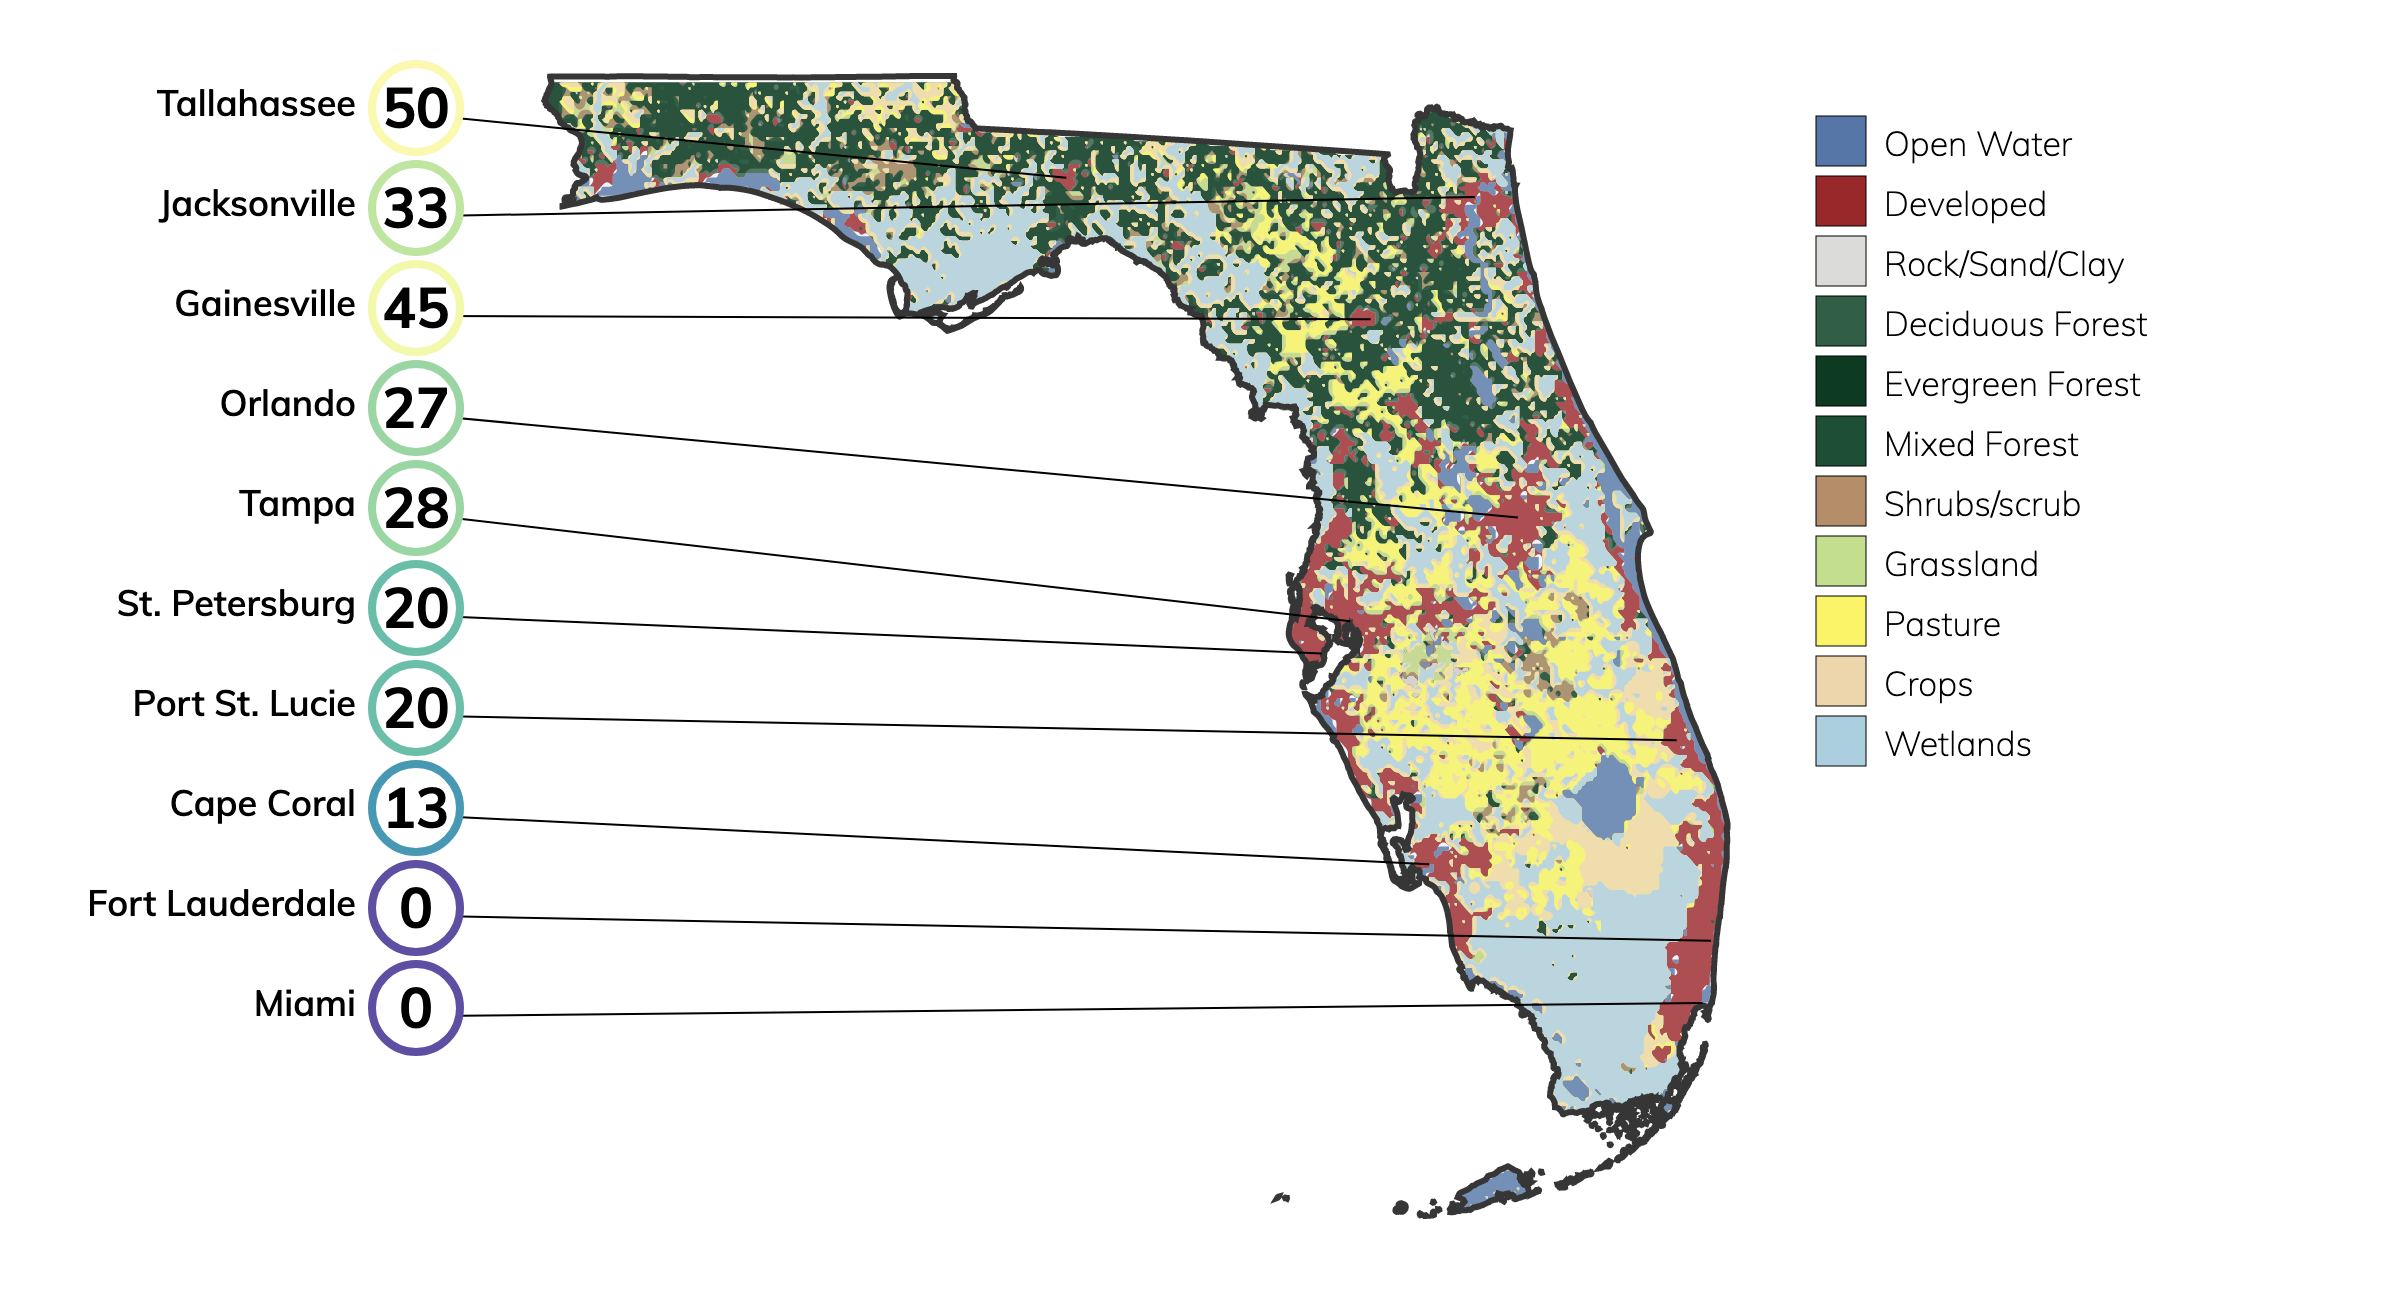 Landcover and Fire Risk for Florida